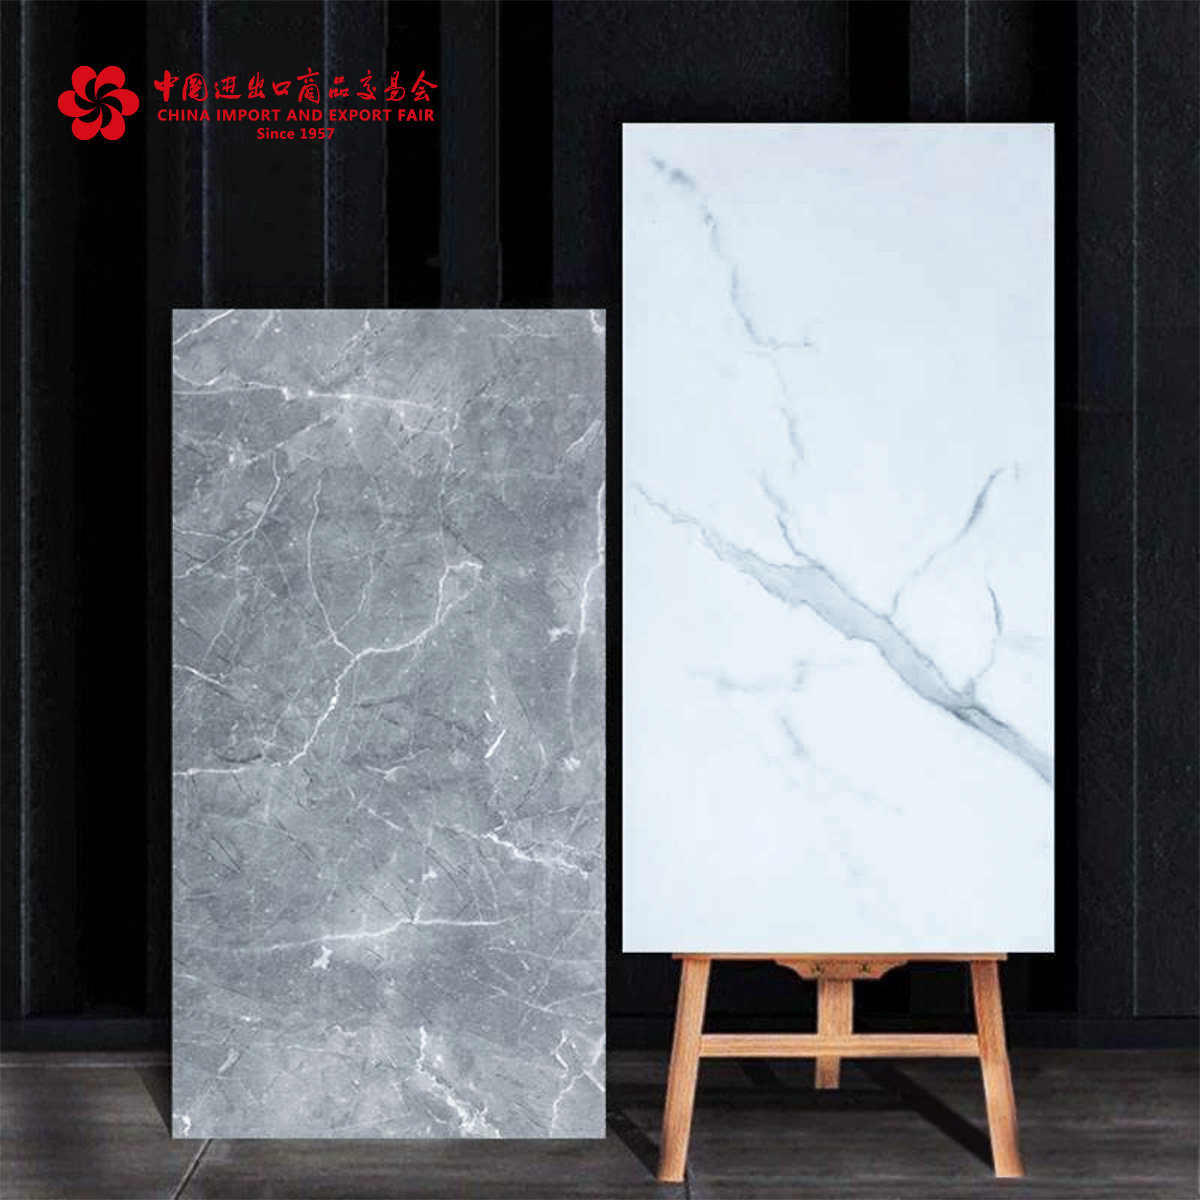 The tiles of Shandong Emosin Decorative Products Co., Ltd. are made of premium marble with unique textures and vibrant colors. If you are interested in the company, please visit their store on the #CantonFairOnlinePlatform: cantonfair.org.cn/zh-CN/shops/71…